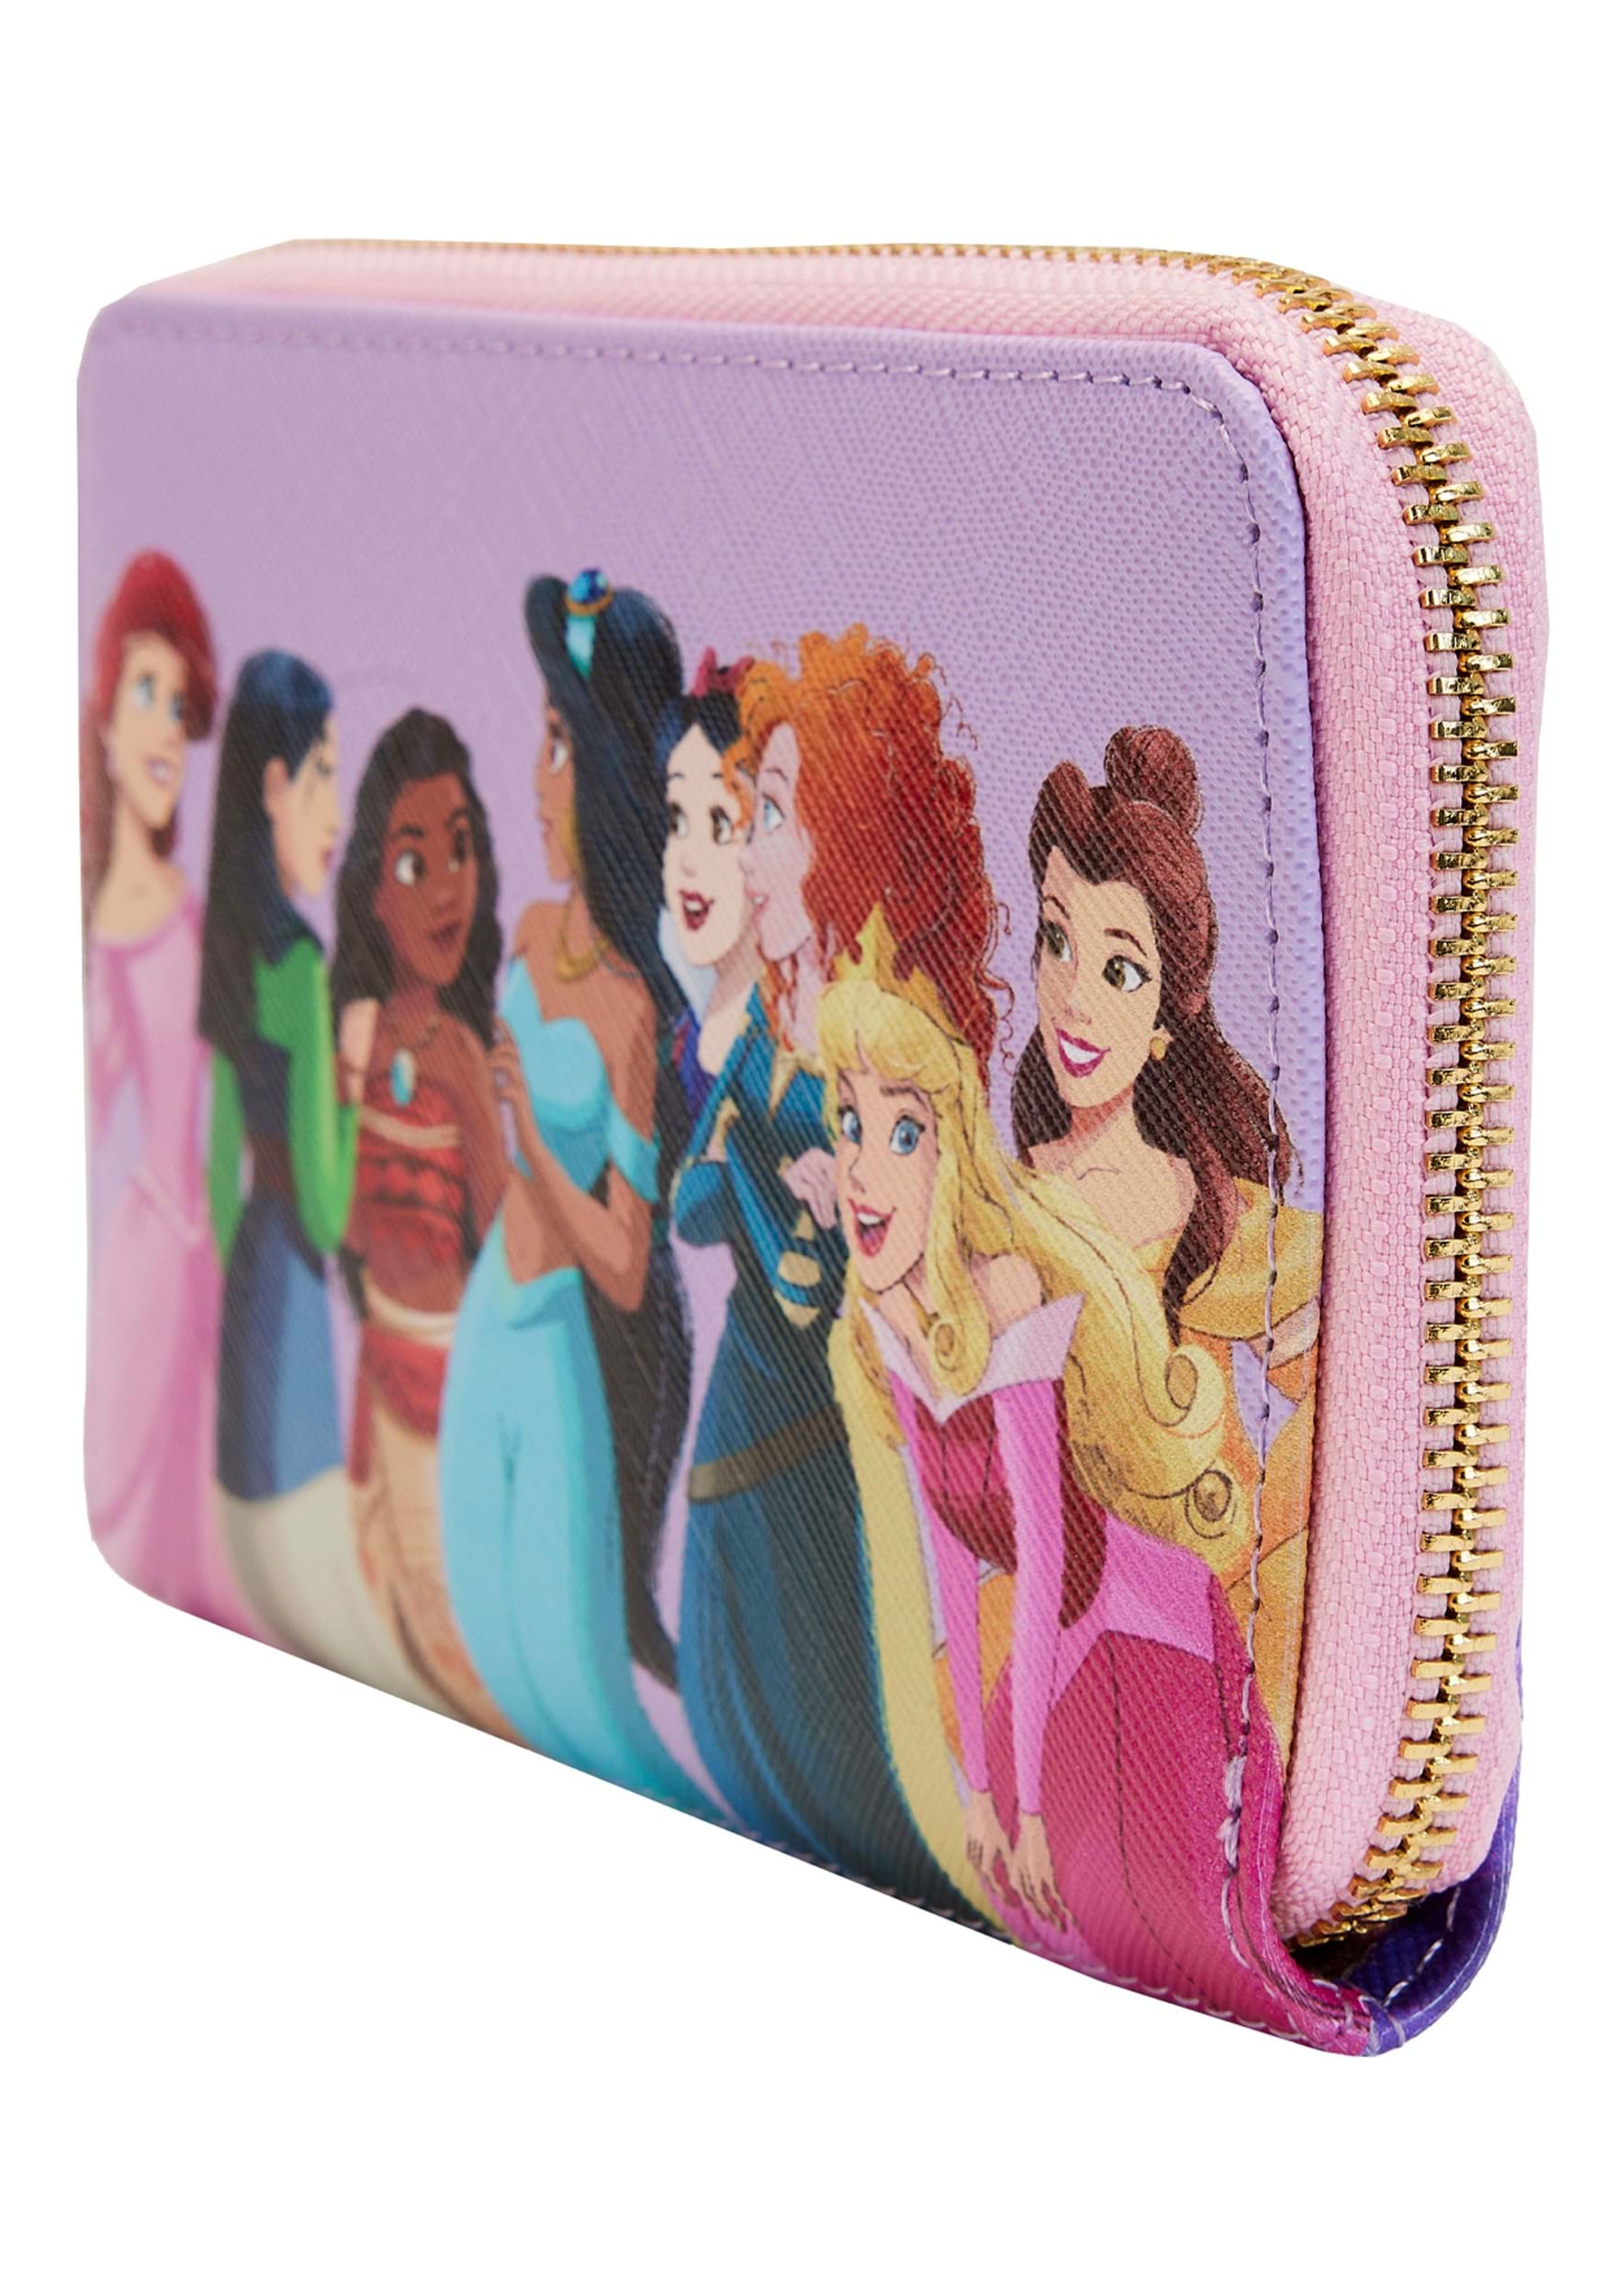 Disney Villains Color Block Zip Around Wallet by Loungefly